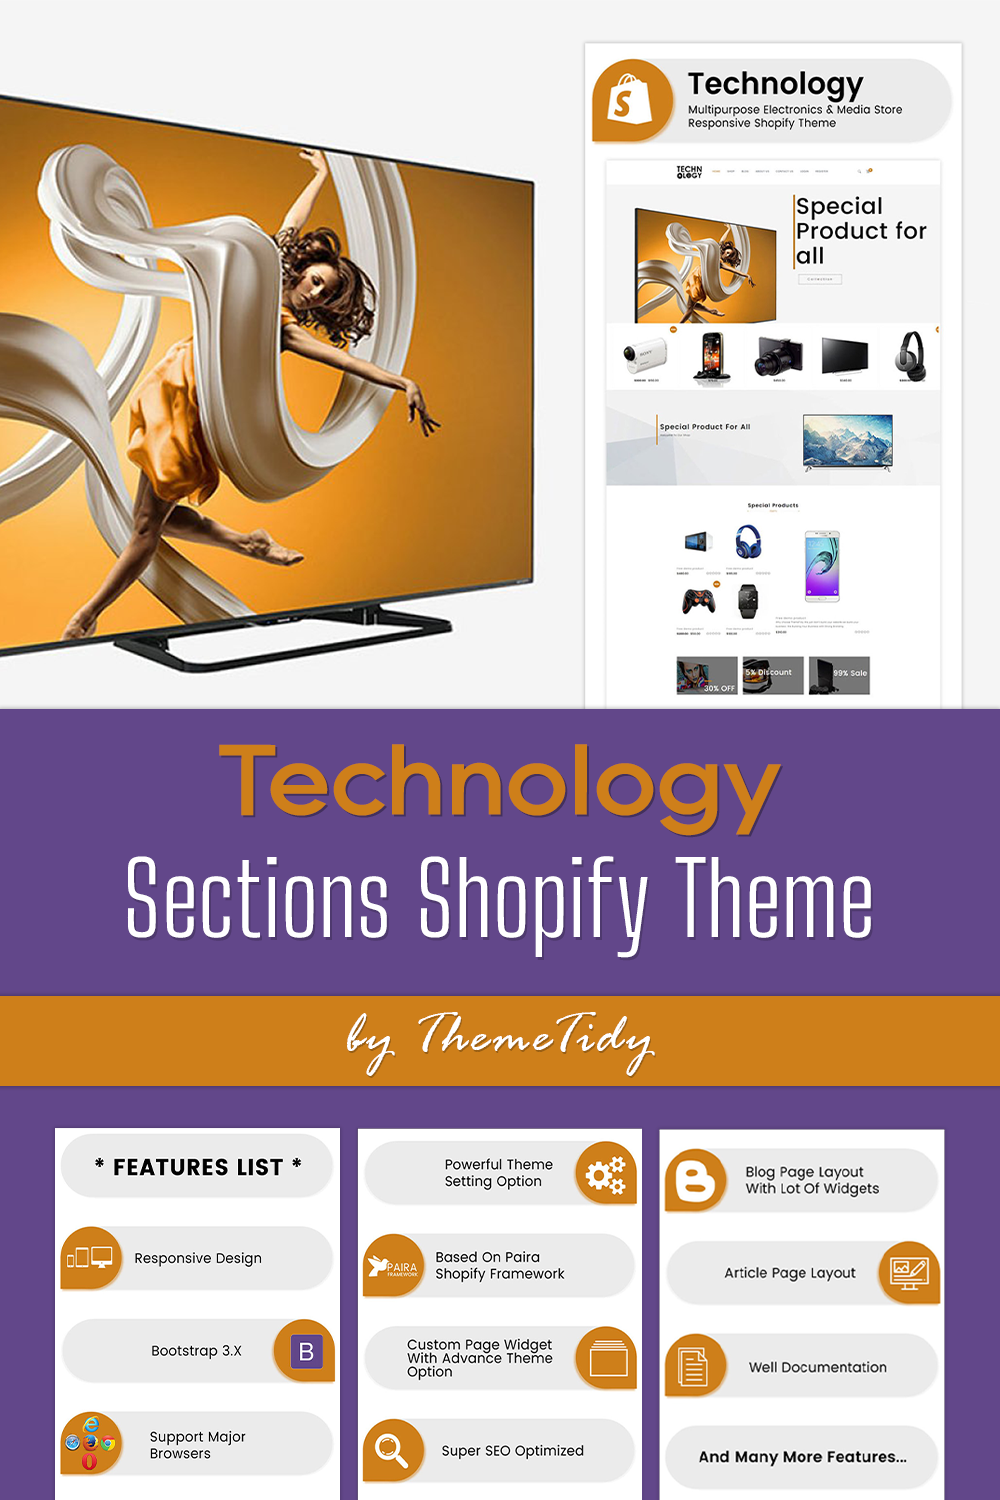 Technology sections shopify theme images of pinterest.